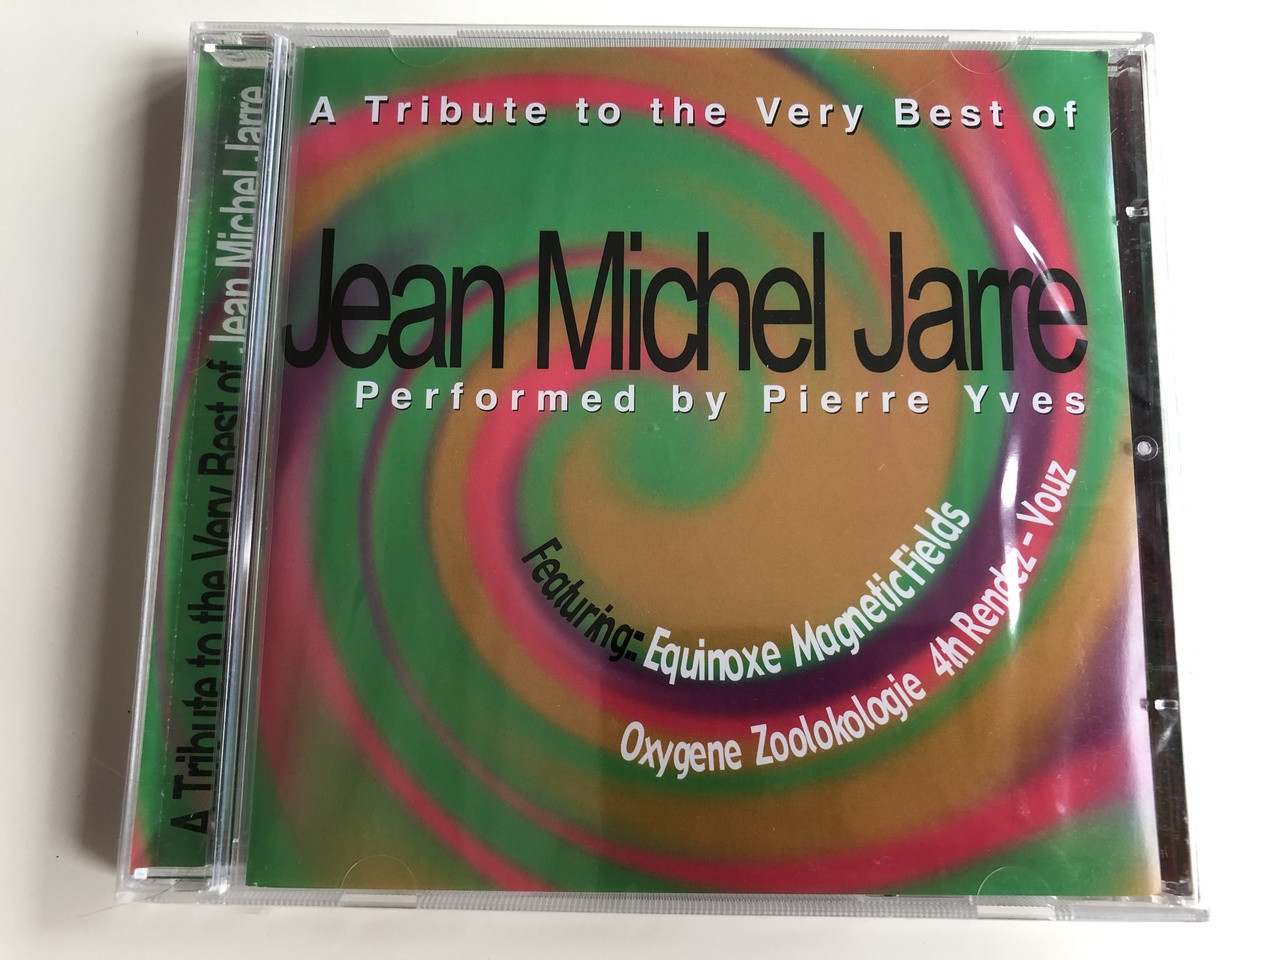 A TRIBUTE TO THE VERY BEST OF JEAN MICHEL JARRE - PERFORMED BY PIERRE YVES  / Featuring: Equinoxe Magnetic Fields, Oxygene Zoolokolie 4th Rendez - Vouz  / AUDIO CD 2001 - bibleinmylanguage